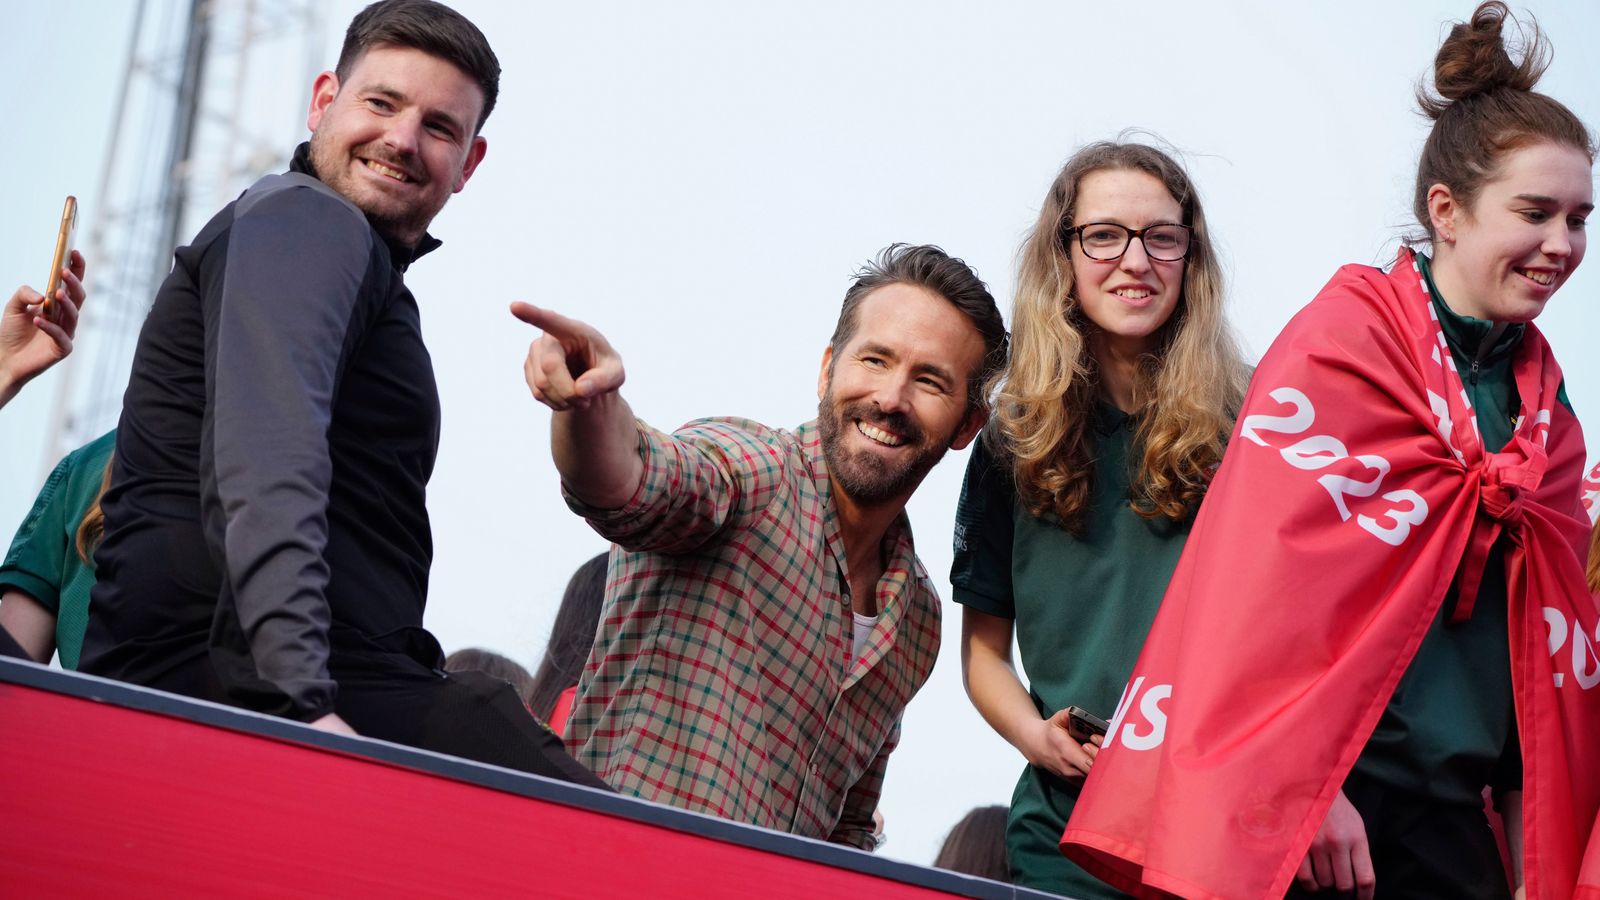 Ryan Reynolds and Rob McElhenney celebrate Wrexham AFC's promotion with bus parade